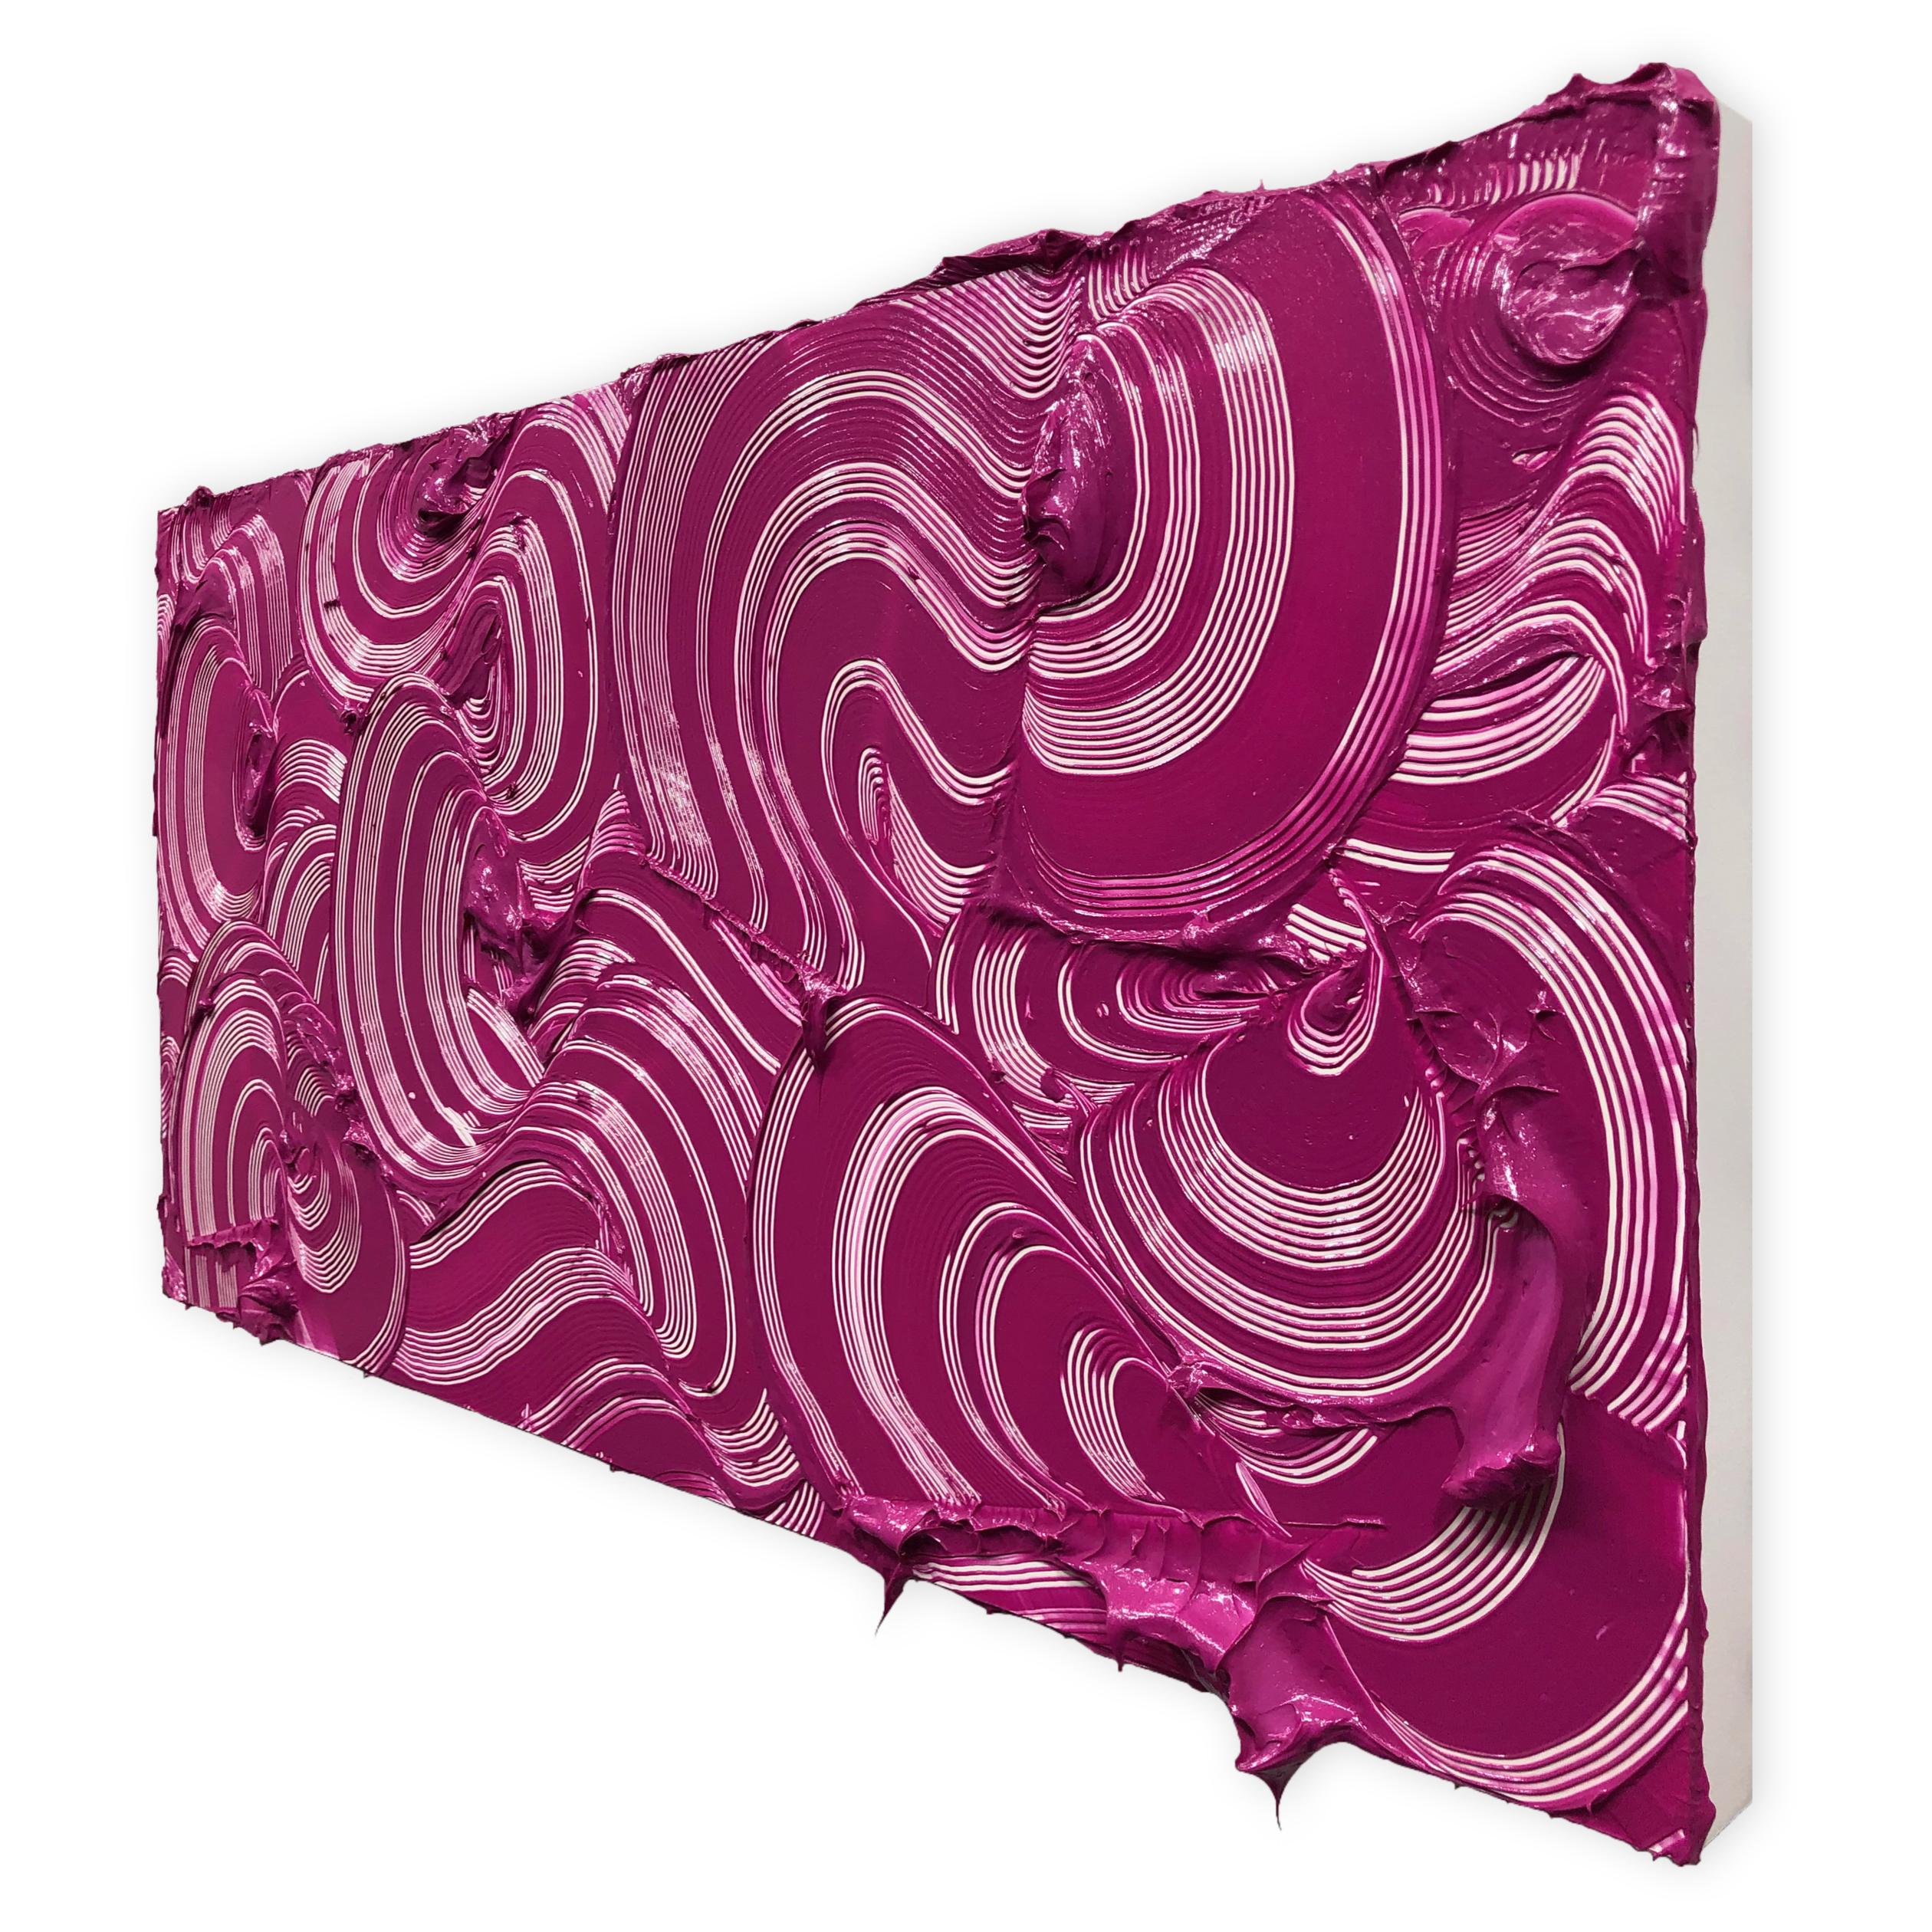 Guzzolene II - textured contemporary painting, magenta strokes, abstract - Sculpture by Tim Nikiforuk